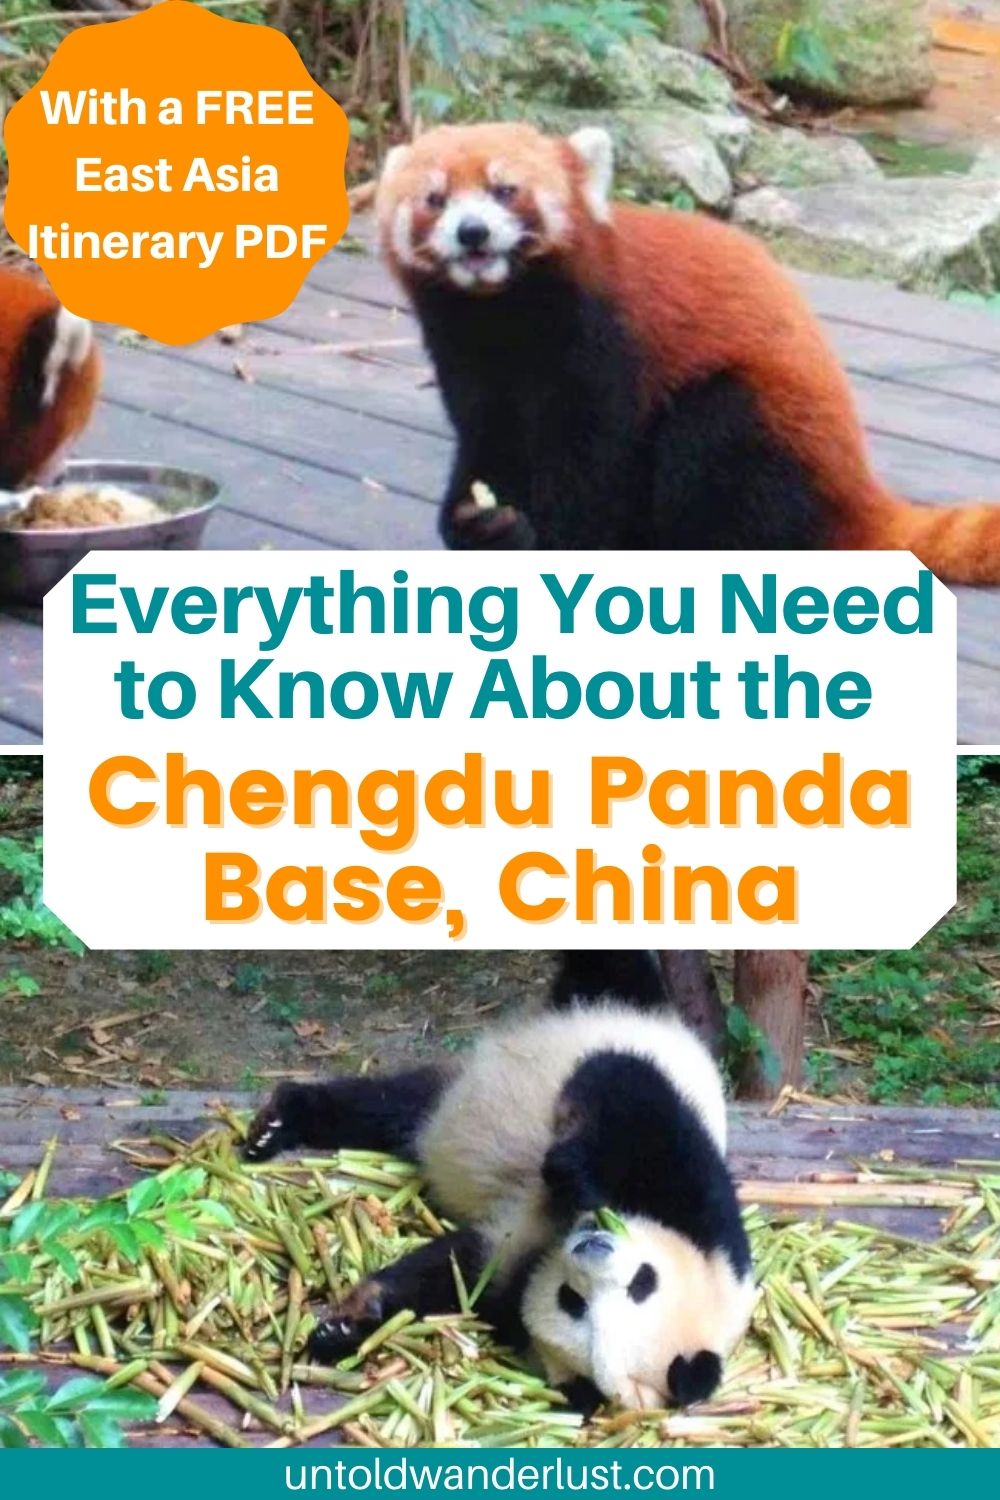 All You Need to Know About the Chengdu Panda Base in China